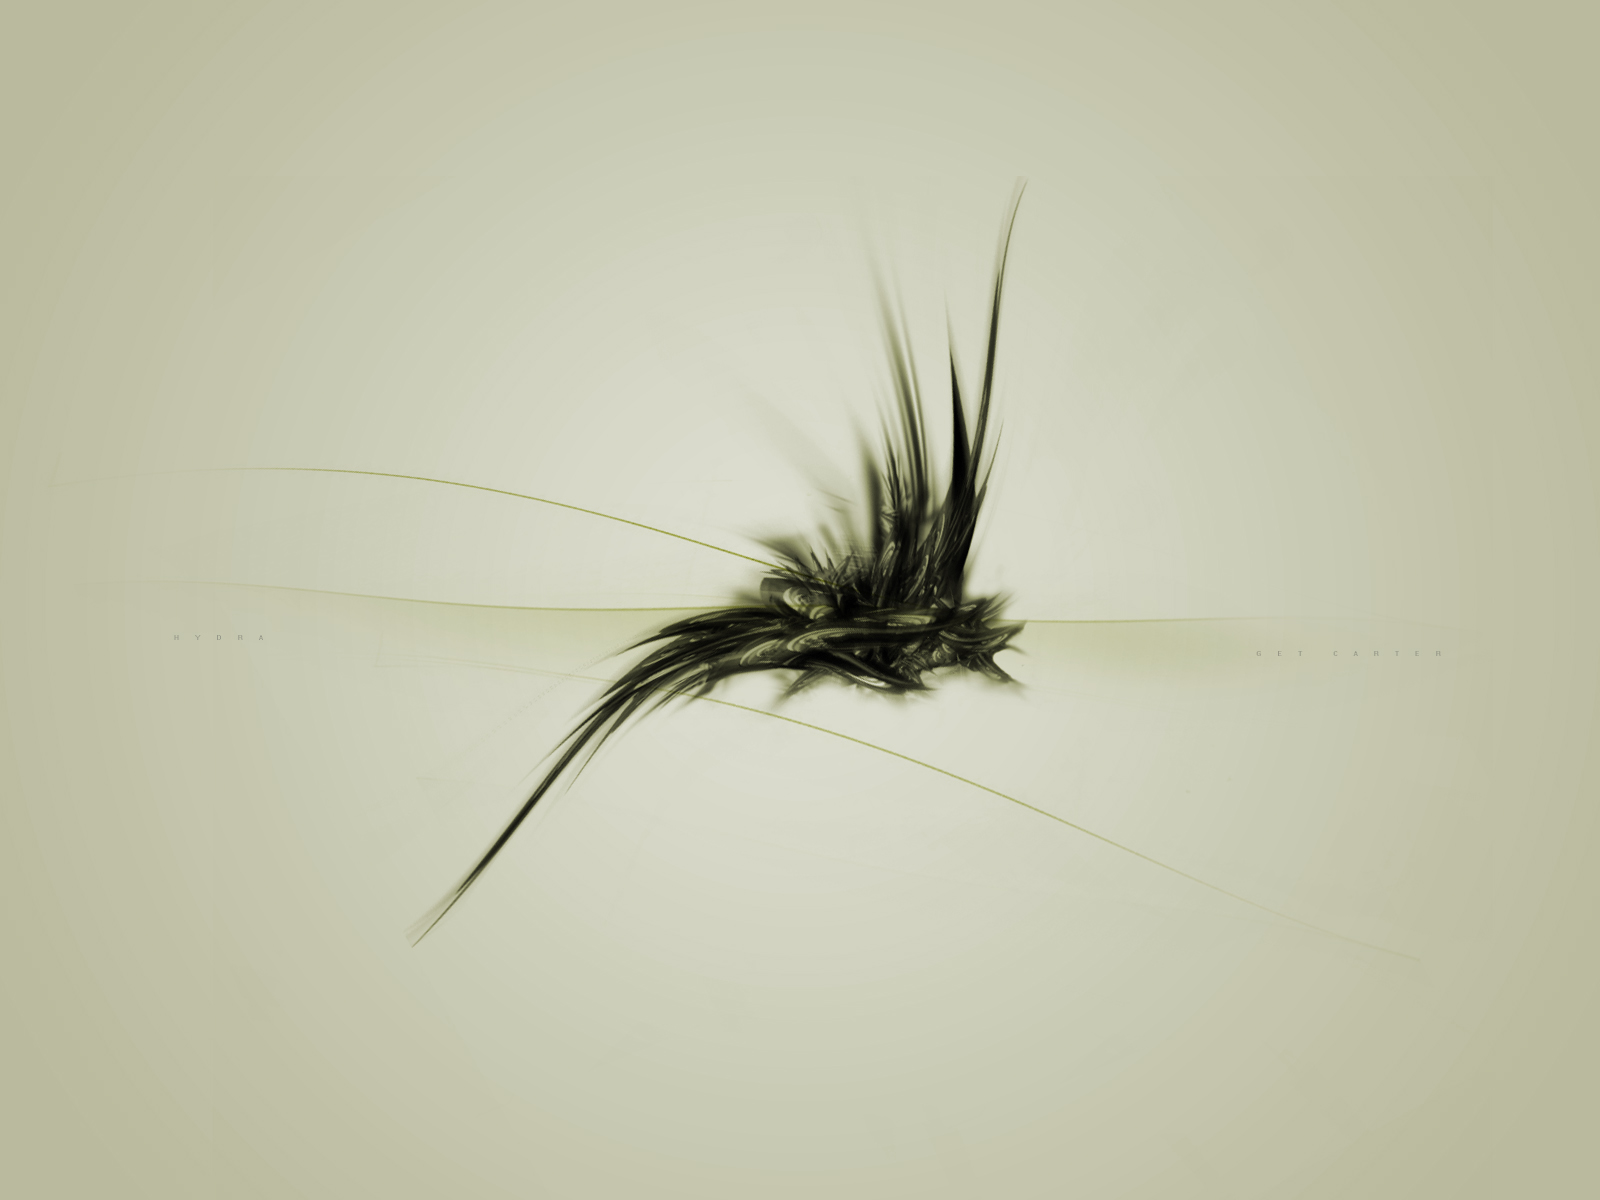 Abstract Artistic Fly Insect 1600x1200